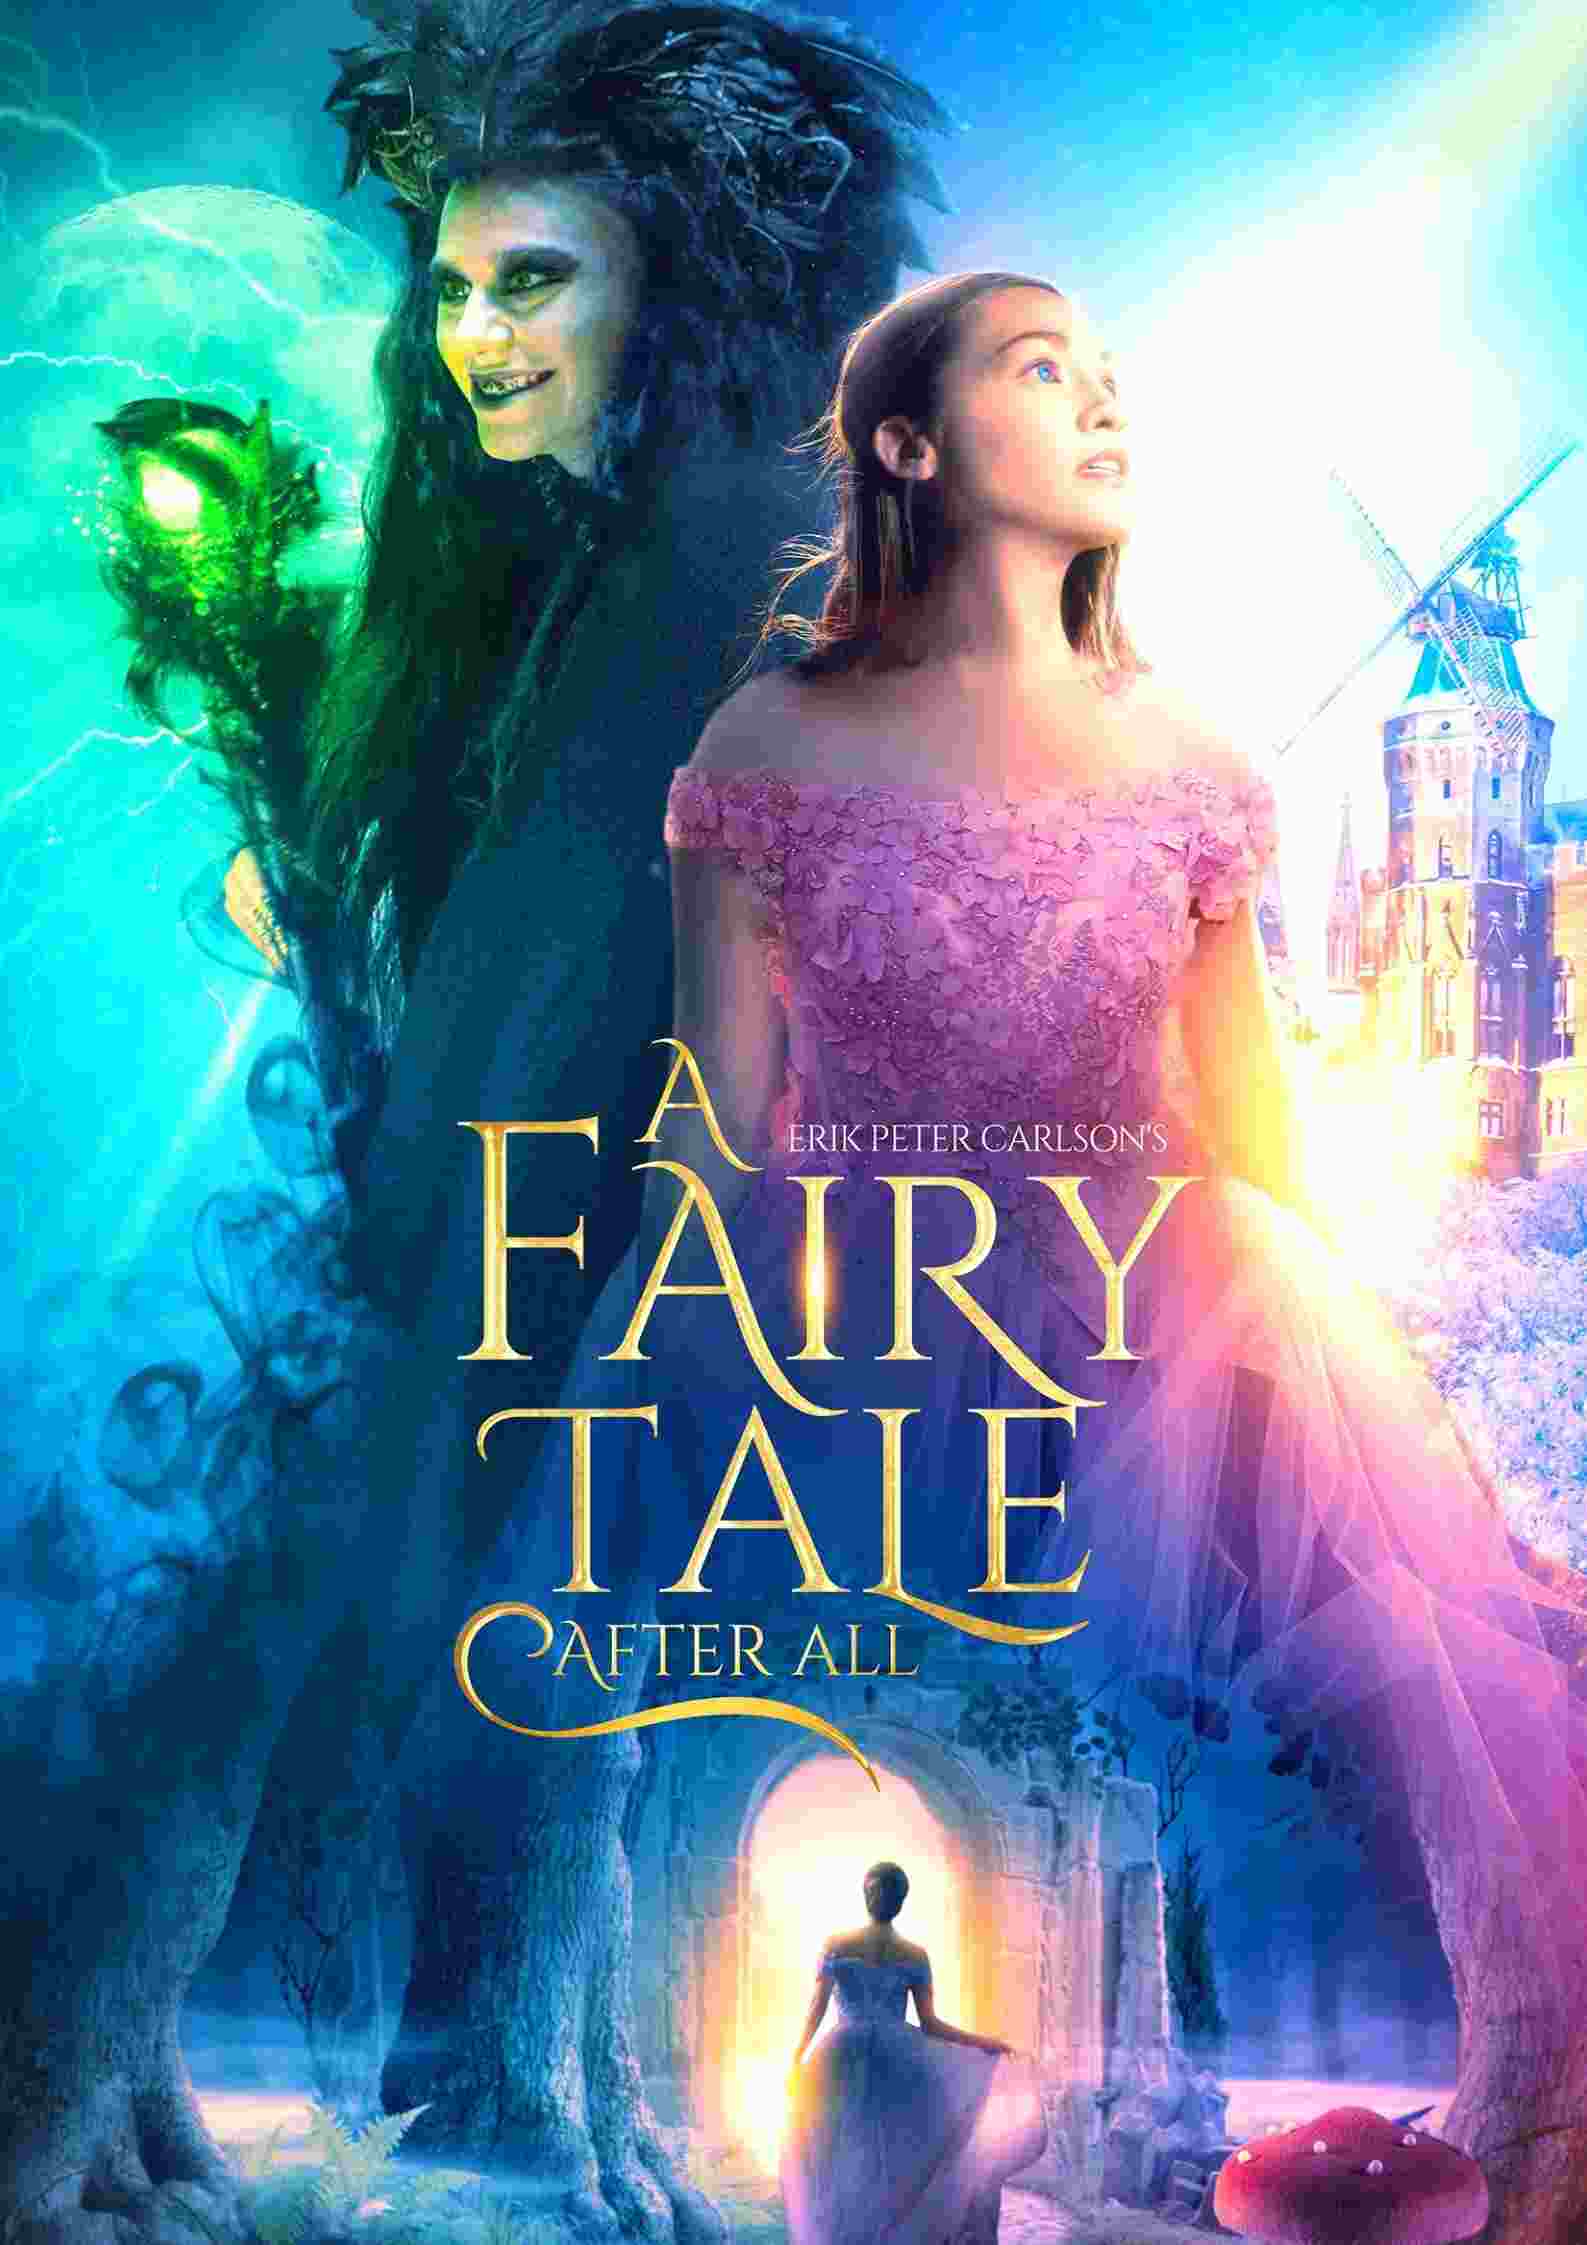 A Fairy Tale After Parents guide and age rating | 2022